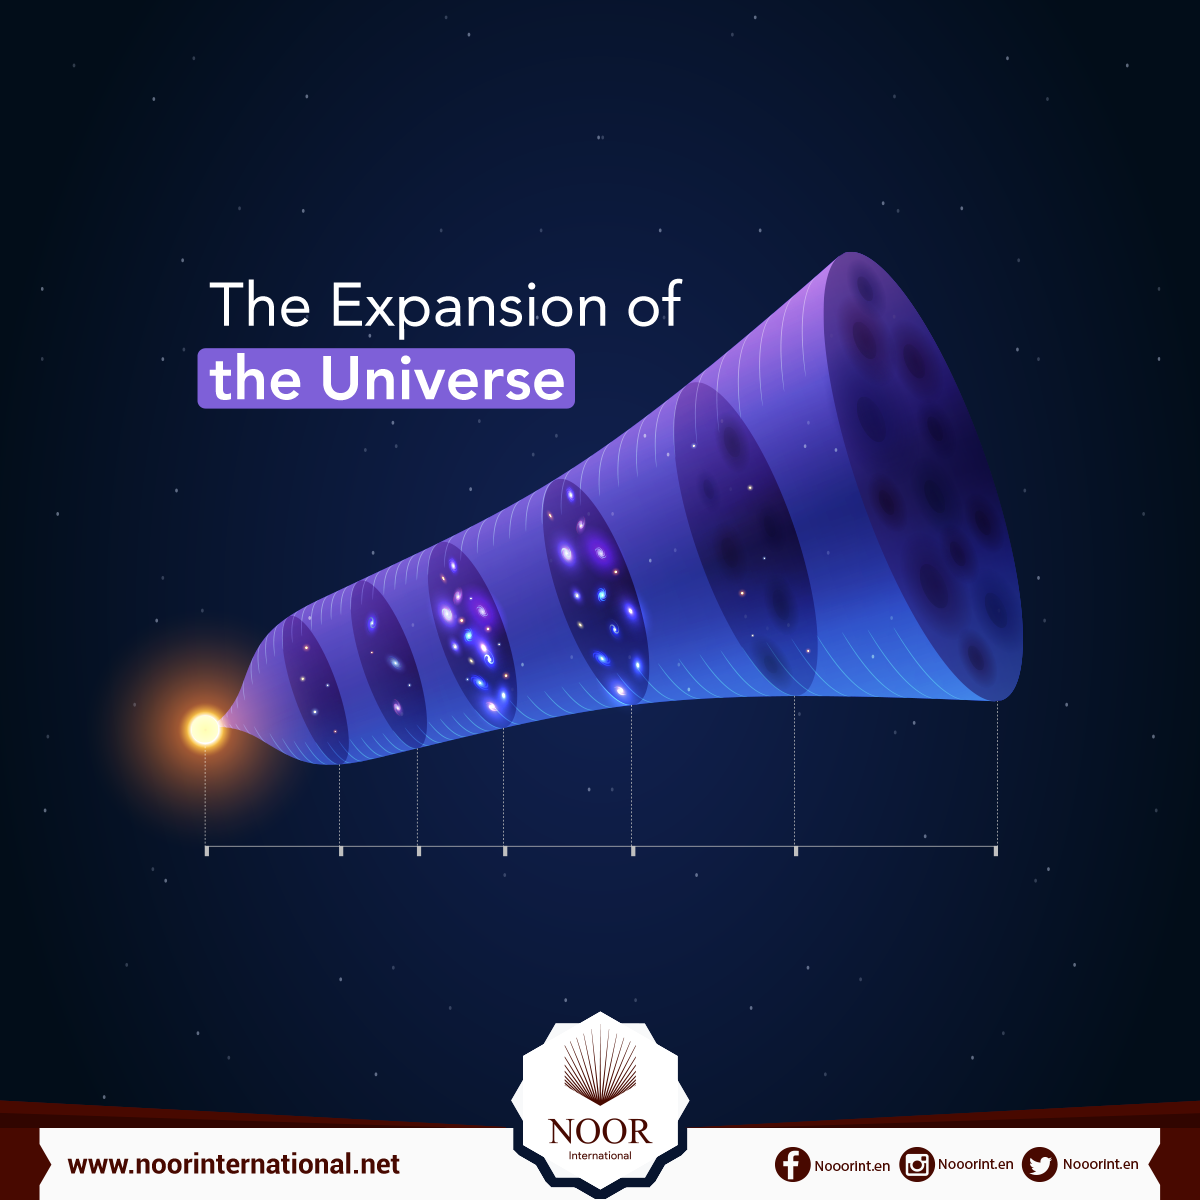 The Expansion of the Universe